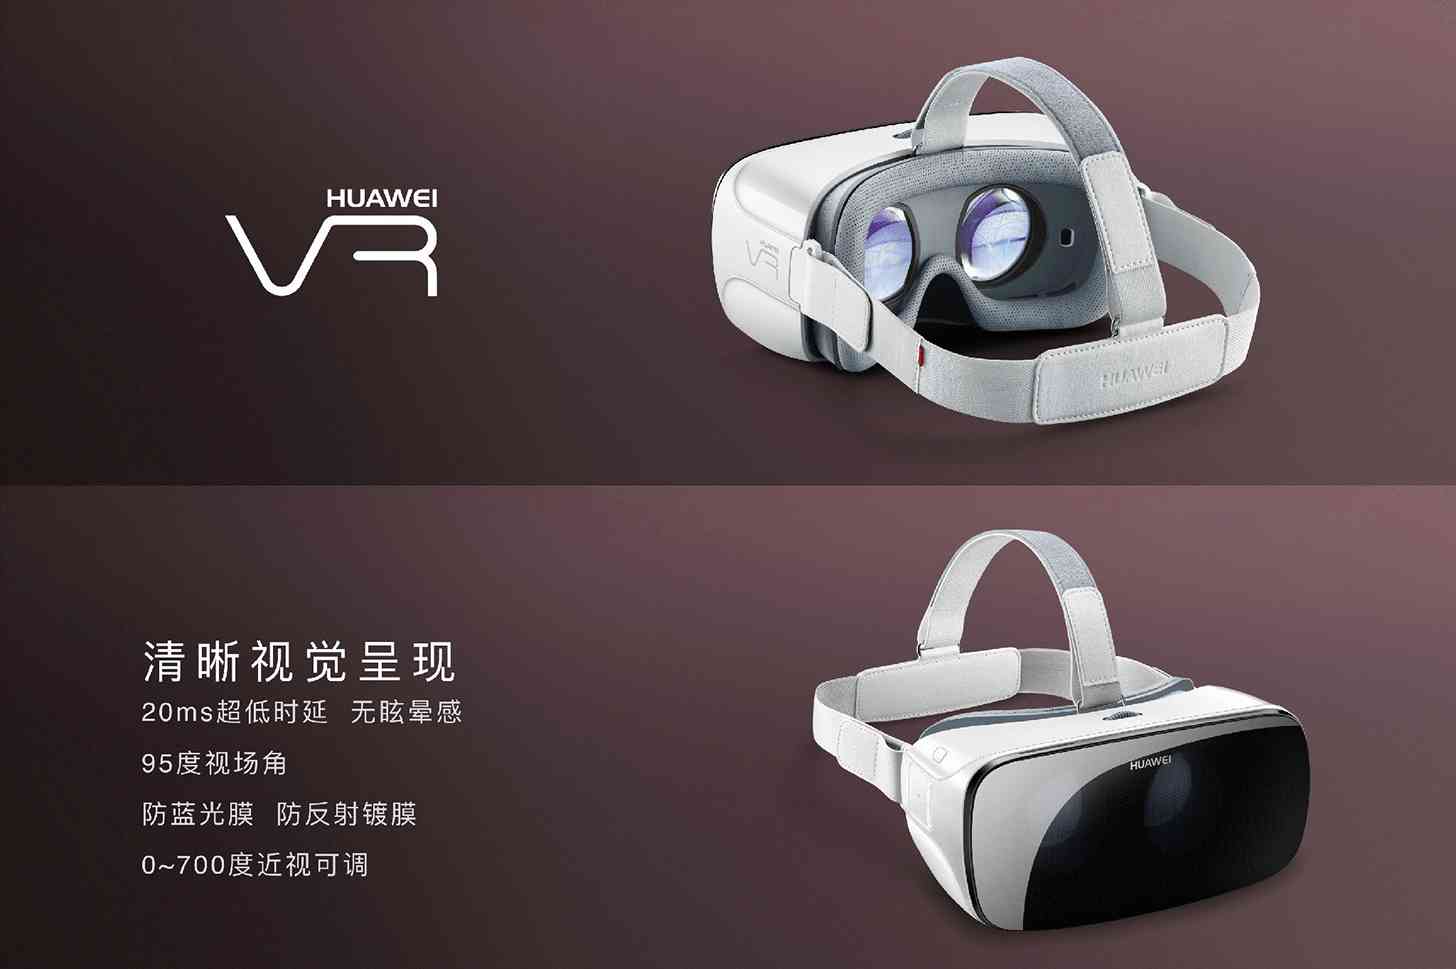 Huawei VR headset official